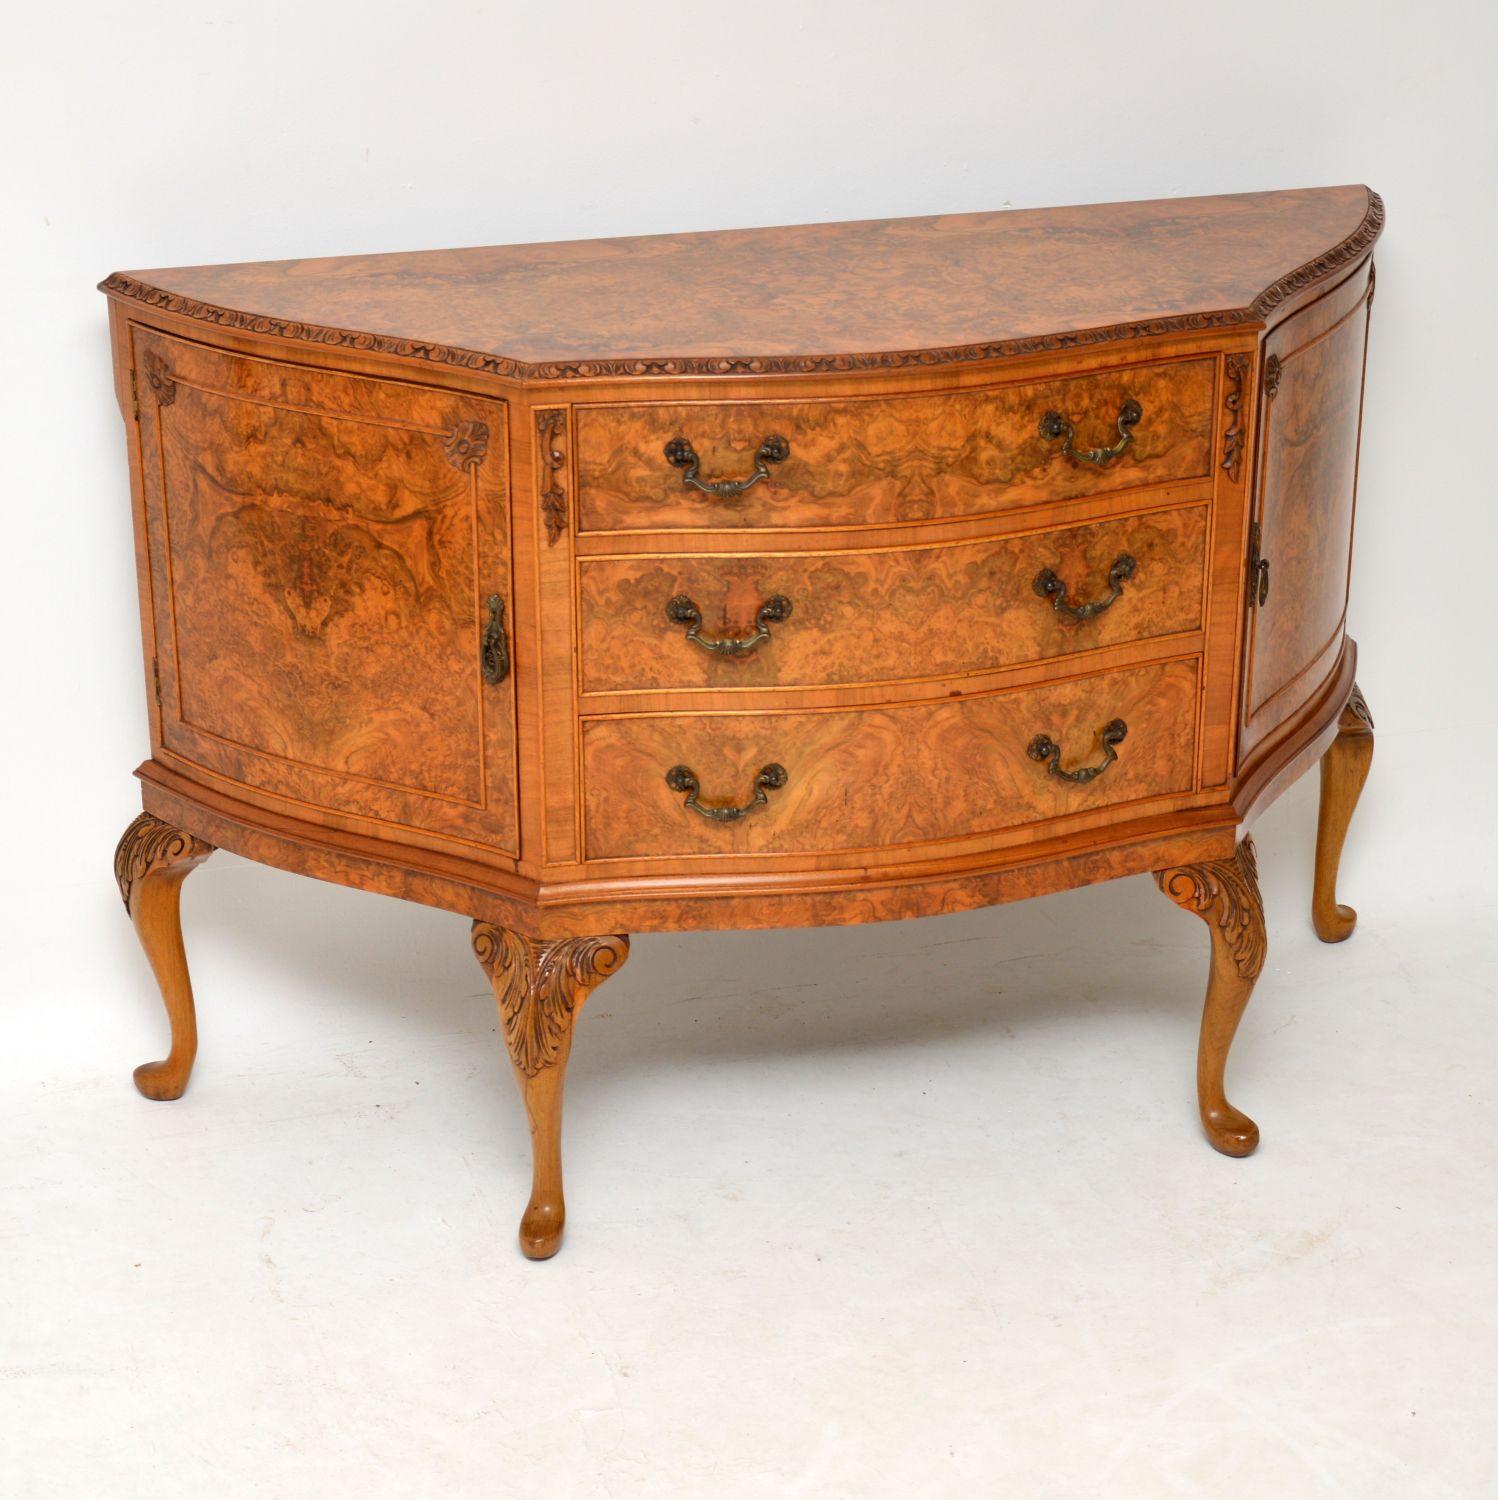 This antique burr walnut sideboard is extremely high quality and is in excellent condition, having just been French polished. Its Queen Anne style and dates to circa 1930s period. The burr walnut patterns are magnificent all-over and it’s